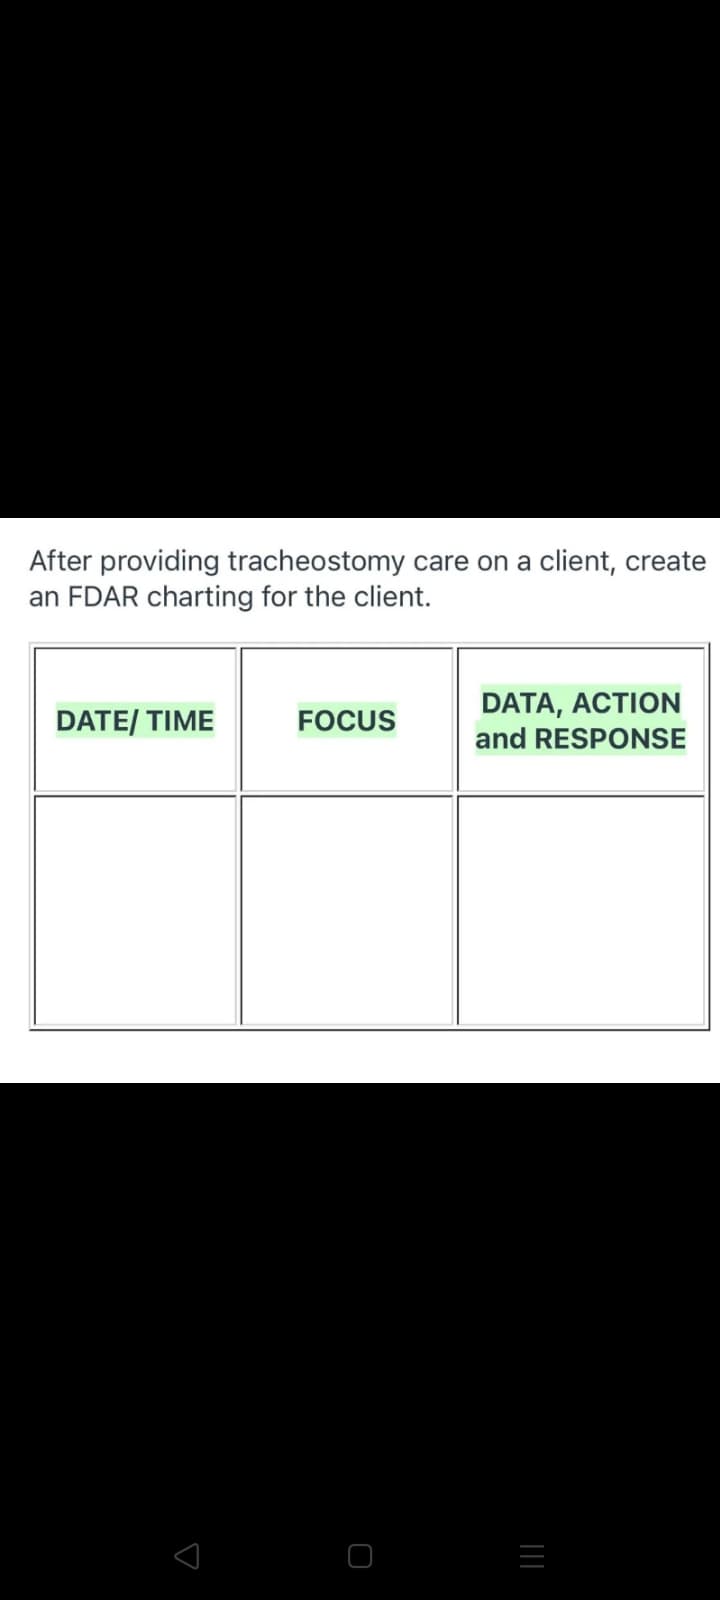 After providing tracheostomy care on a client, create
an FDAR charting for the client.
DATE/TIME
FOCUS
DATA, ACTION
and RESPONSE